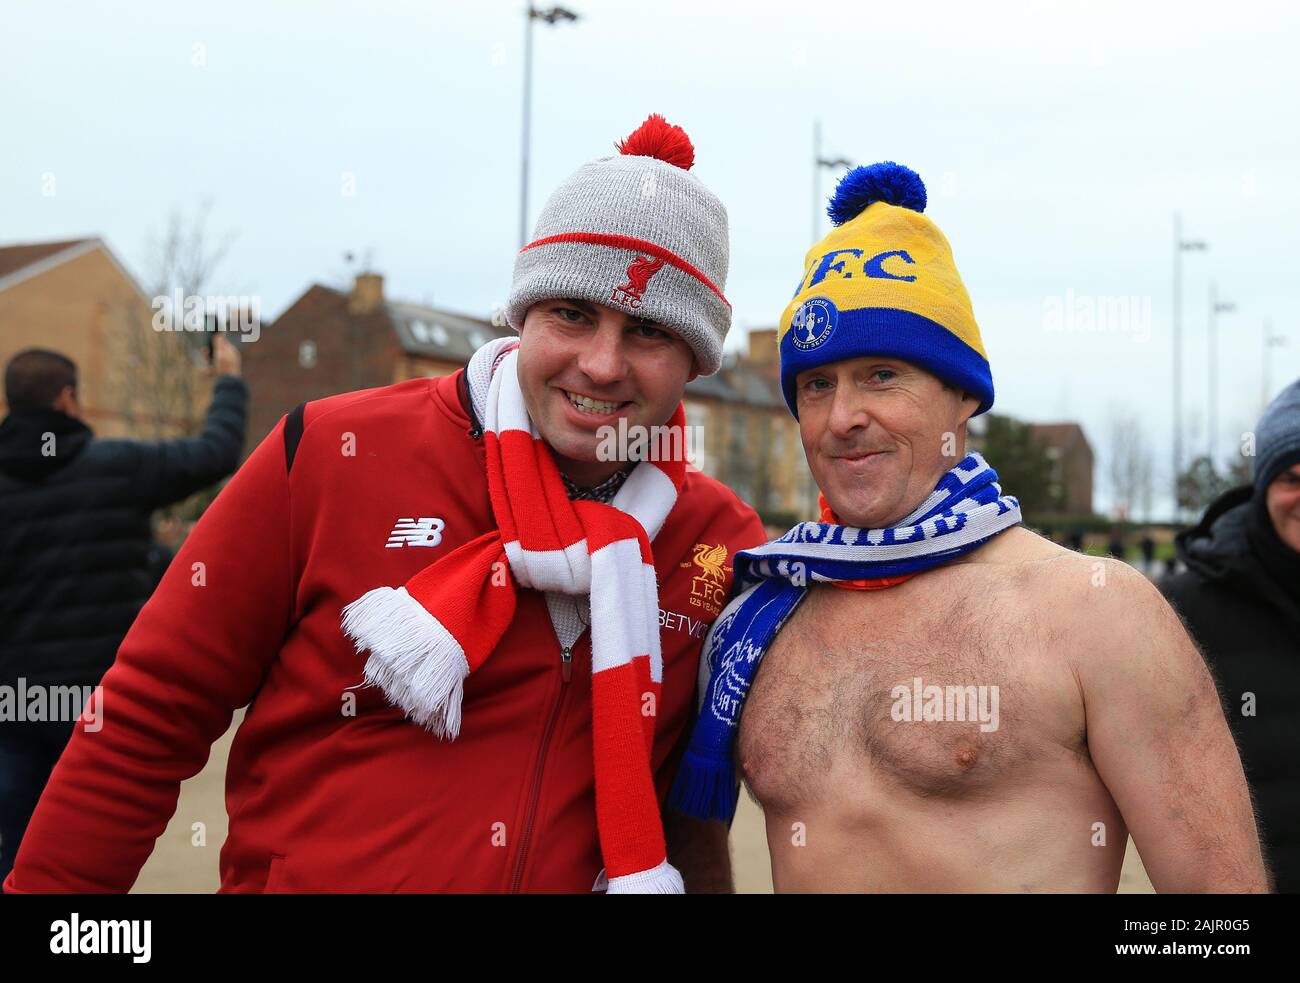 Anfield, Liverpool, Merseyside, UK. 5th Jan, 2020. English FA Cup Football, Liverpool versus Everton; legendary charity fund raiser and Evertonian Speedo Mick poses for a photo with a Liverpool fan outside the stadium, half way through his fundraising walk from John 0'Groats to Lands End. - Strictly Editorial Use Only. No use with unauthorized audio, video, data, fixture lists, club/league logos or 'live' services. Online in-match use limited to 120 images, no video emulation. No use in betting, games or single club/league/player publications Credit: Action Plus Sports/Alamy Live News Stock Photo